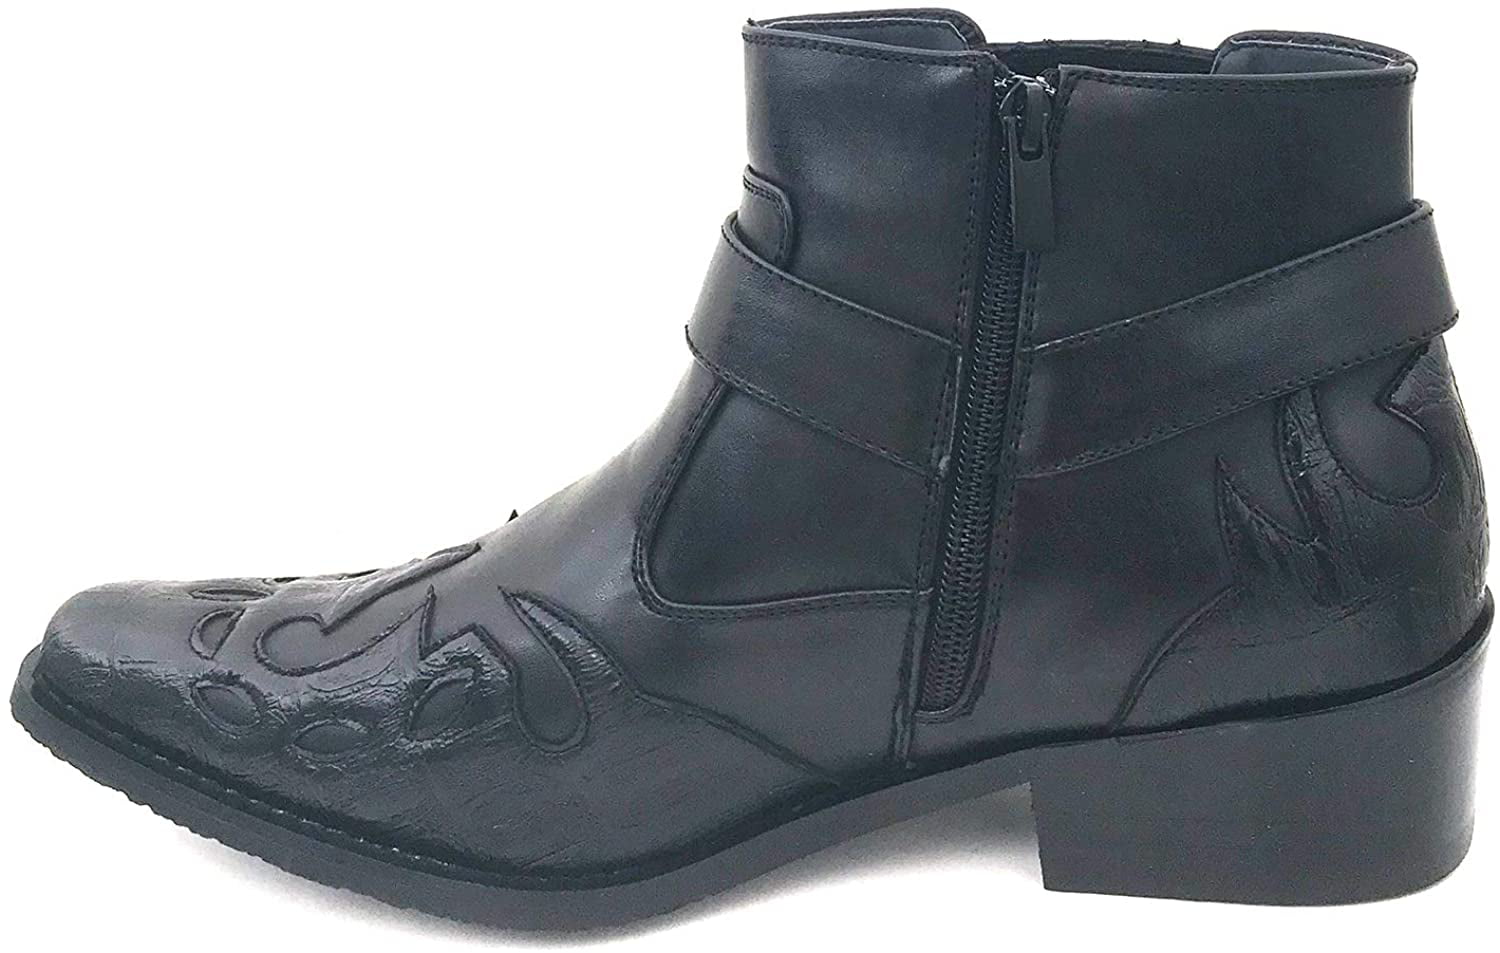 Rampage Whendl Caoboy Ankle Boots Side ZipUp Size:7.5